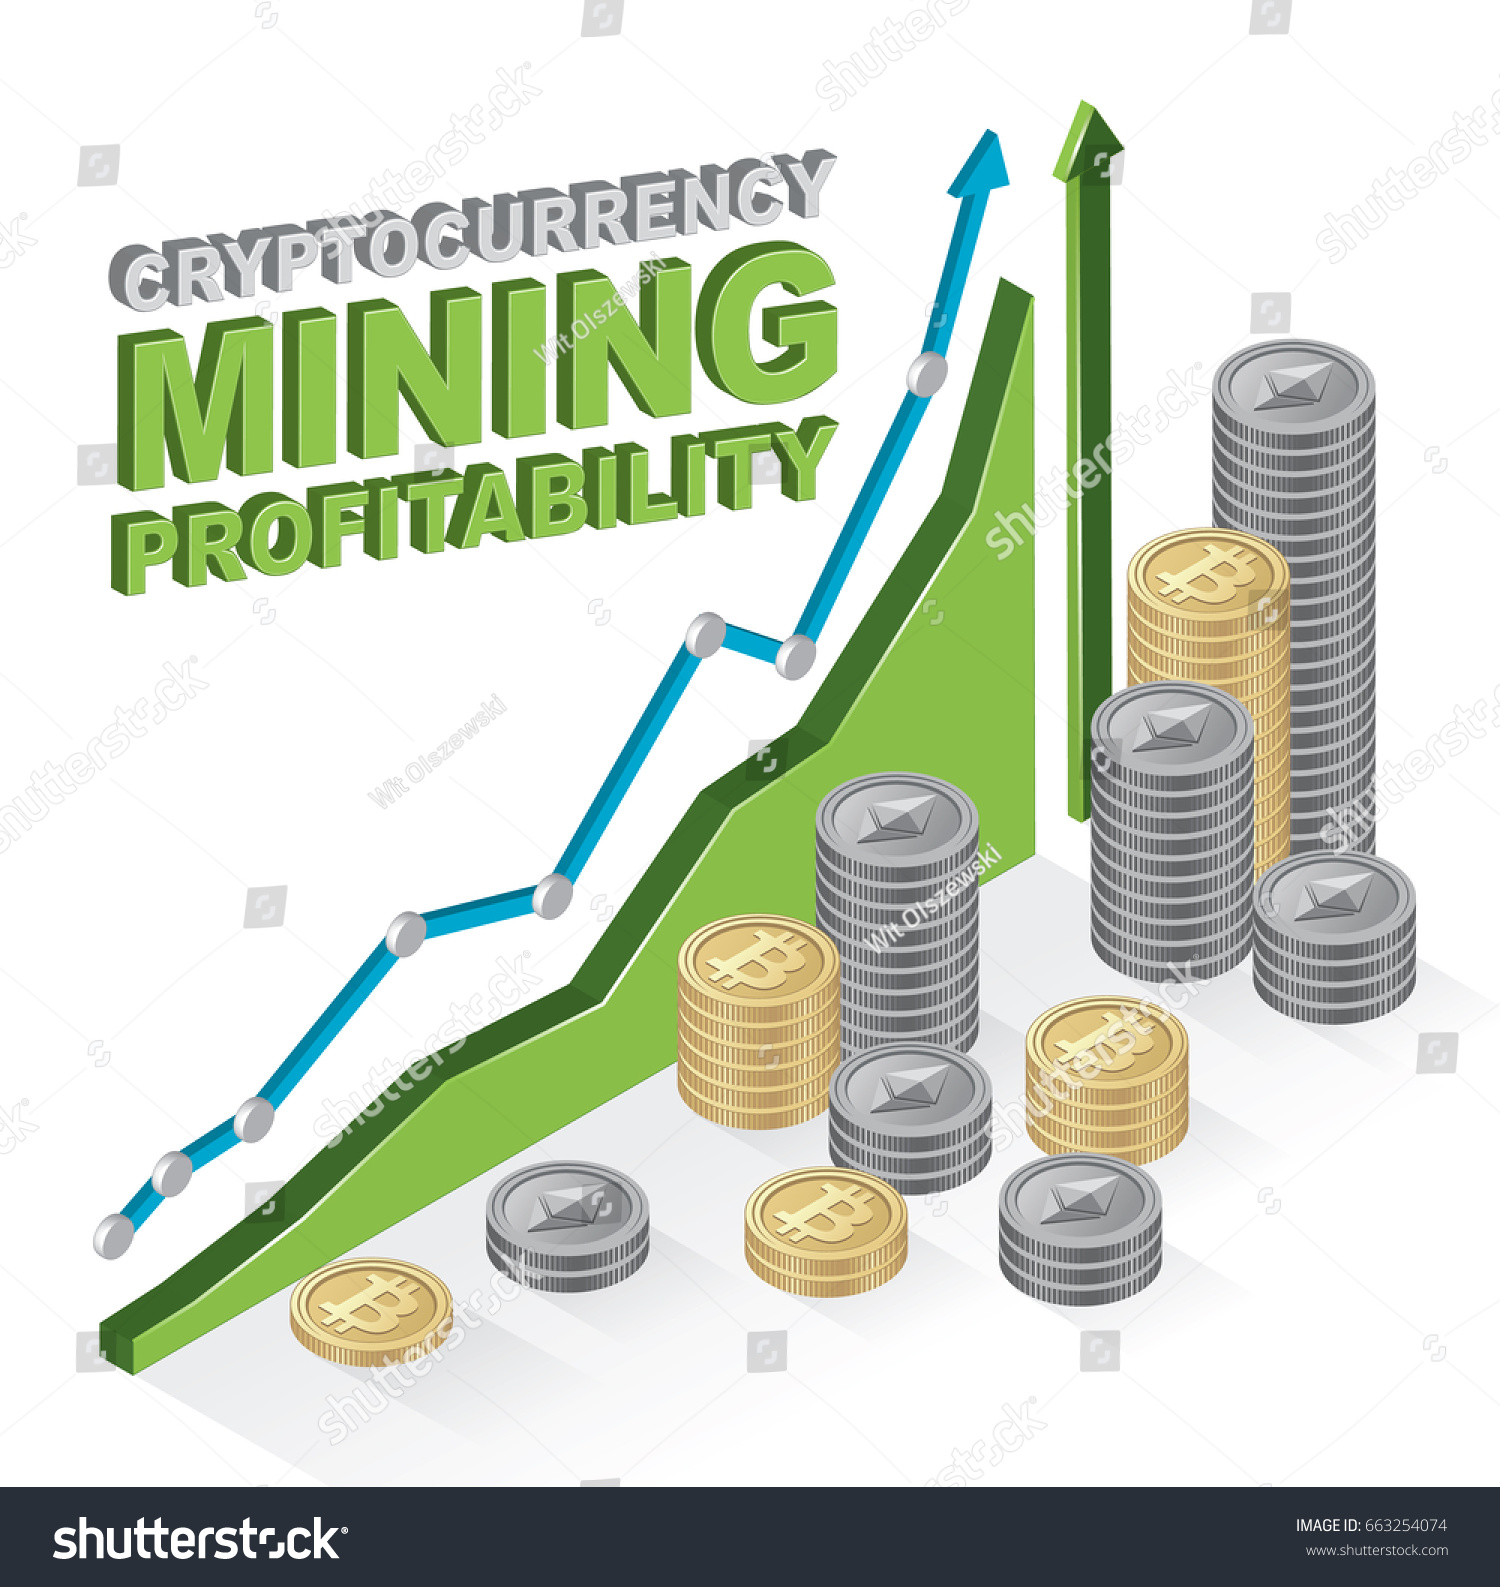 Cryptocurrency Mining Profitability Chart Bitcoins Ethereum Stock Vector Royalty Free 663254074